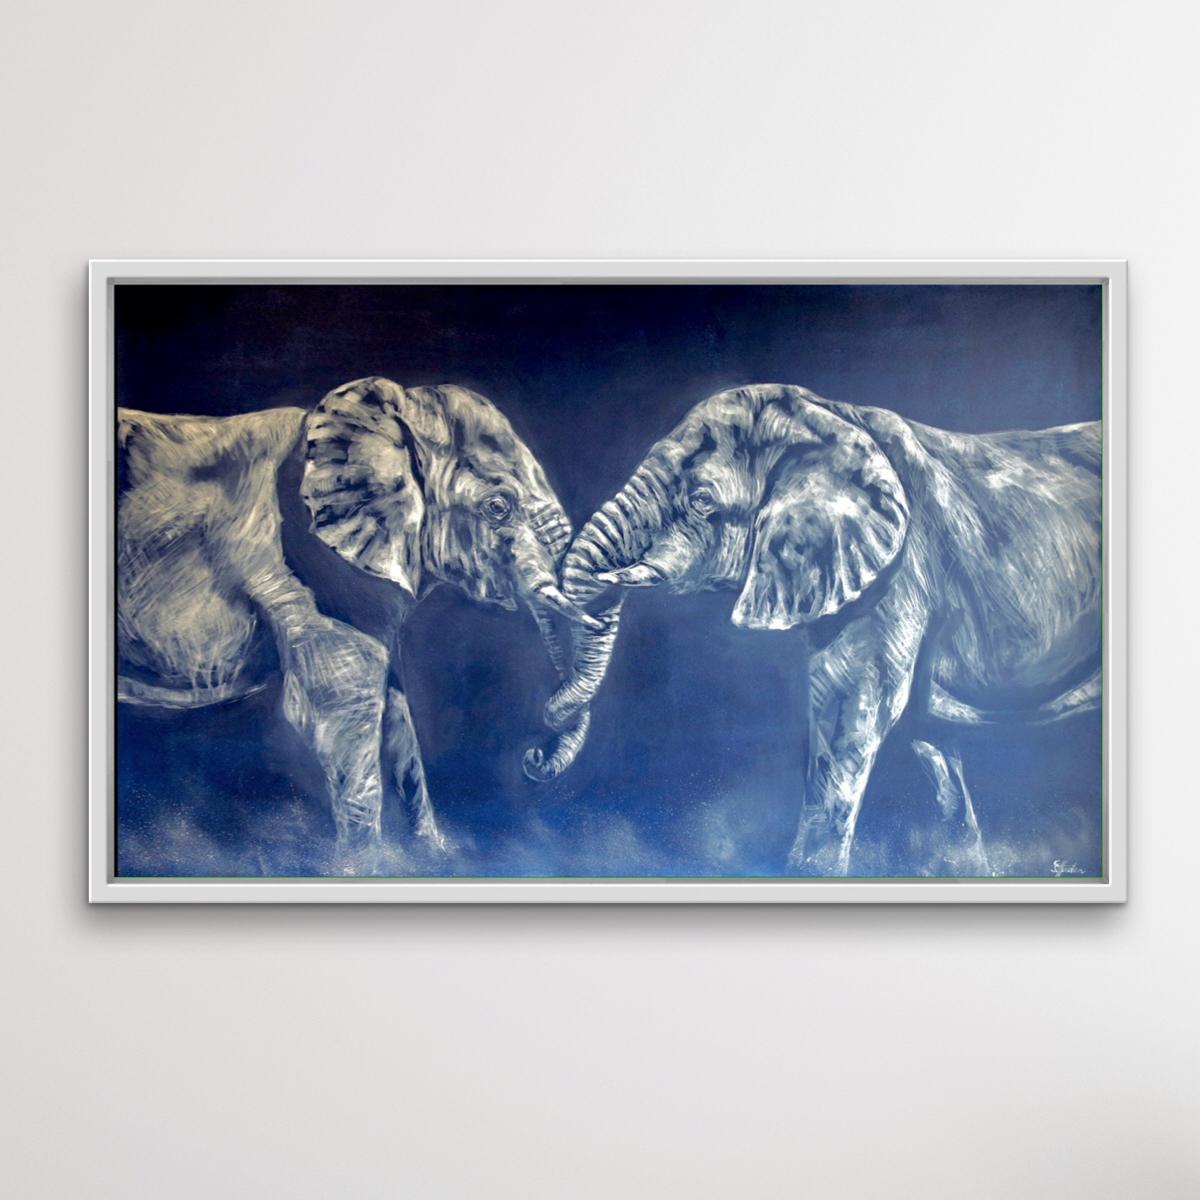 Duel is an original oil painting by Sophie Harden. This wonderful painting of two fighting bull elephants, kicking up the dust as they go has been inspired by Sophie’s travels to Kenya. Painted on dark a blue background, using contrasting white oil